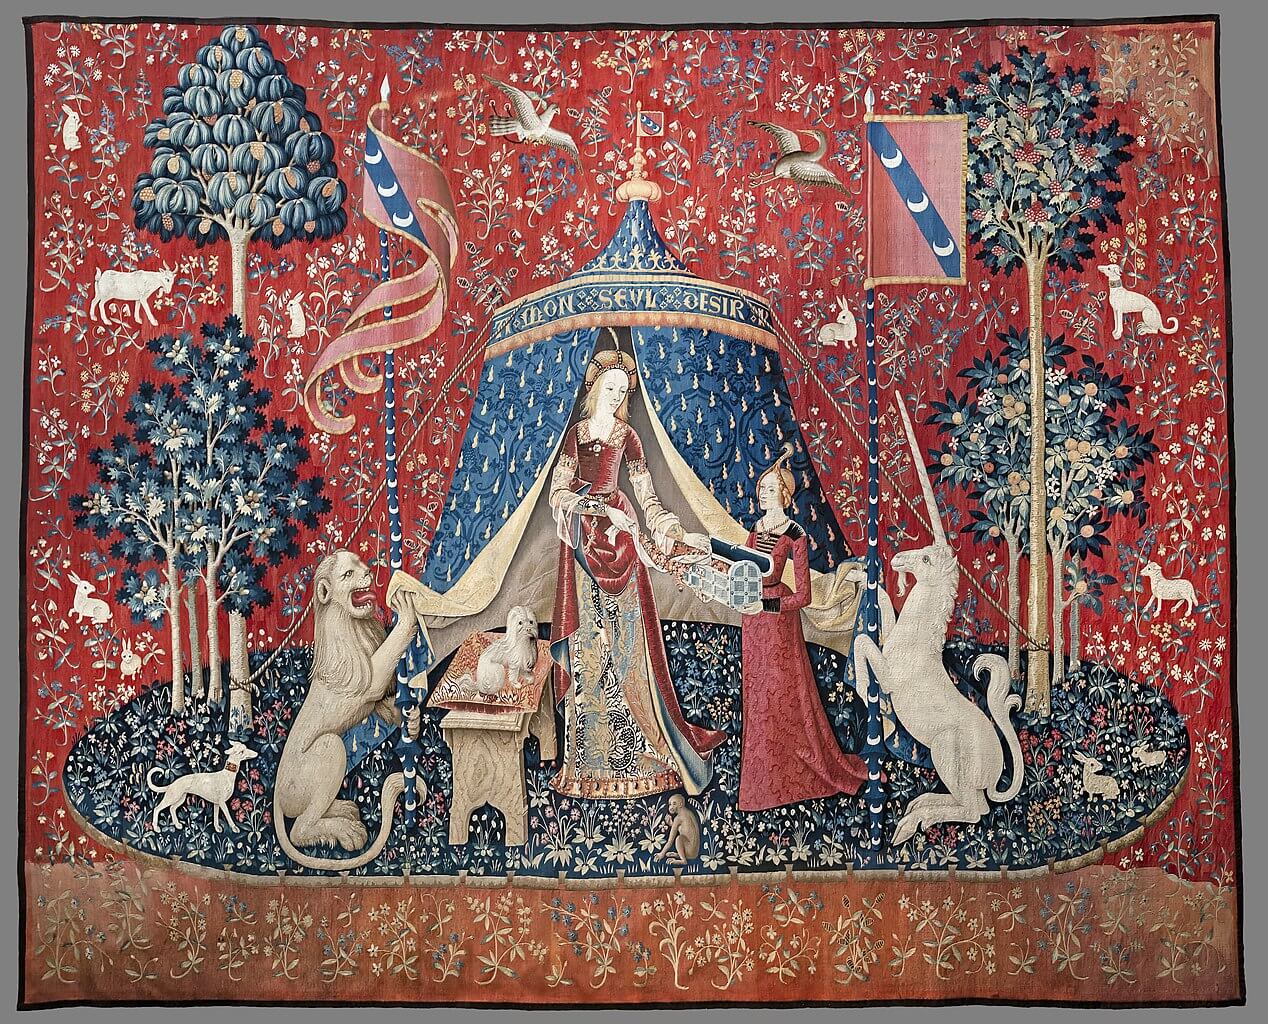 A unicorn on a tapestry.